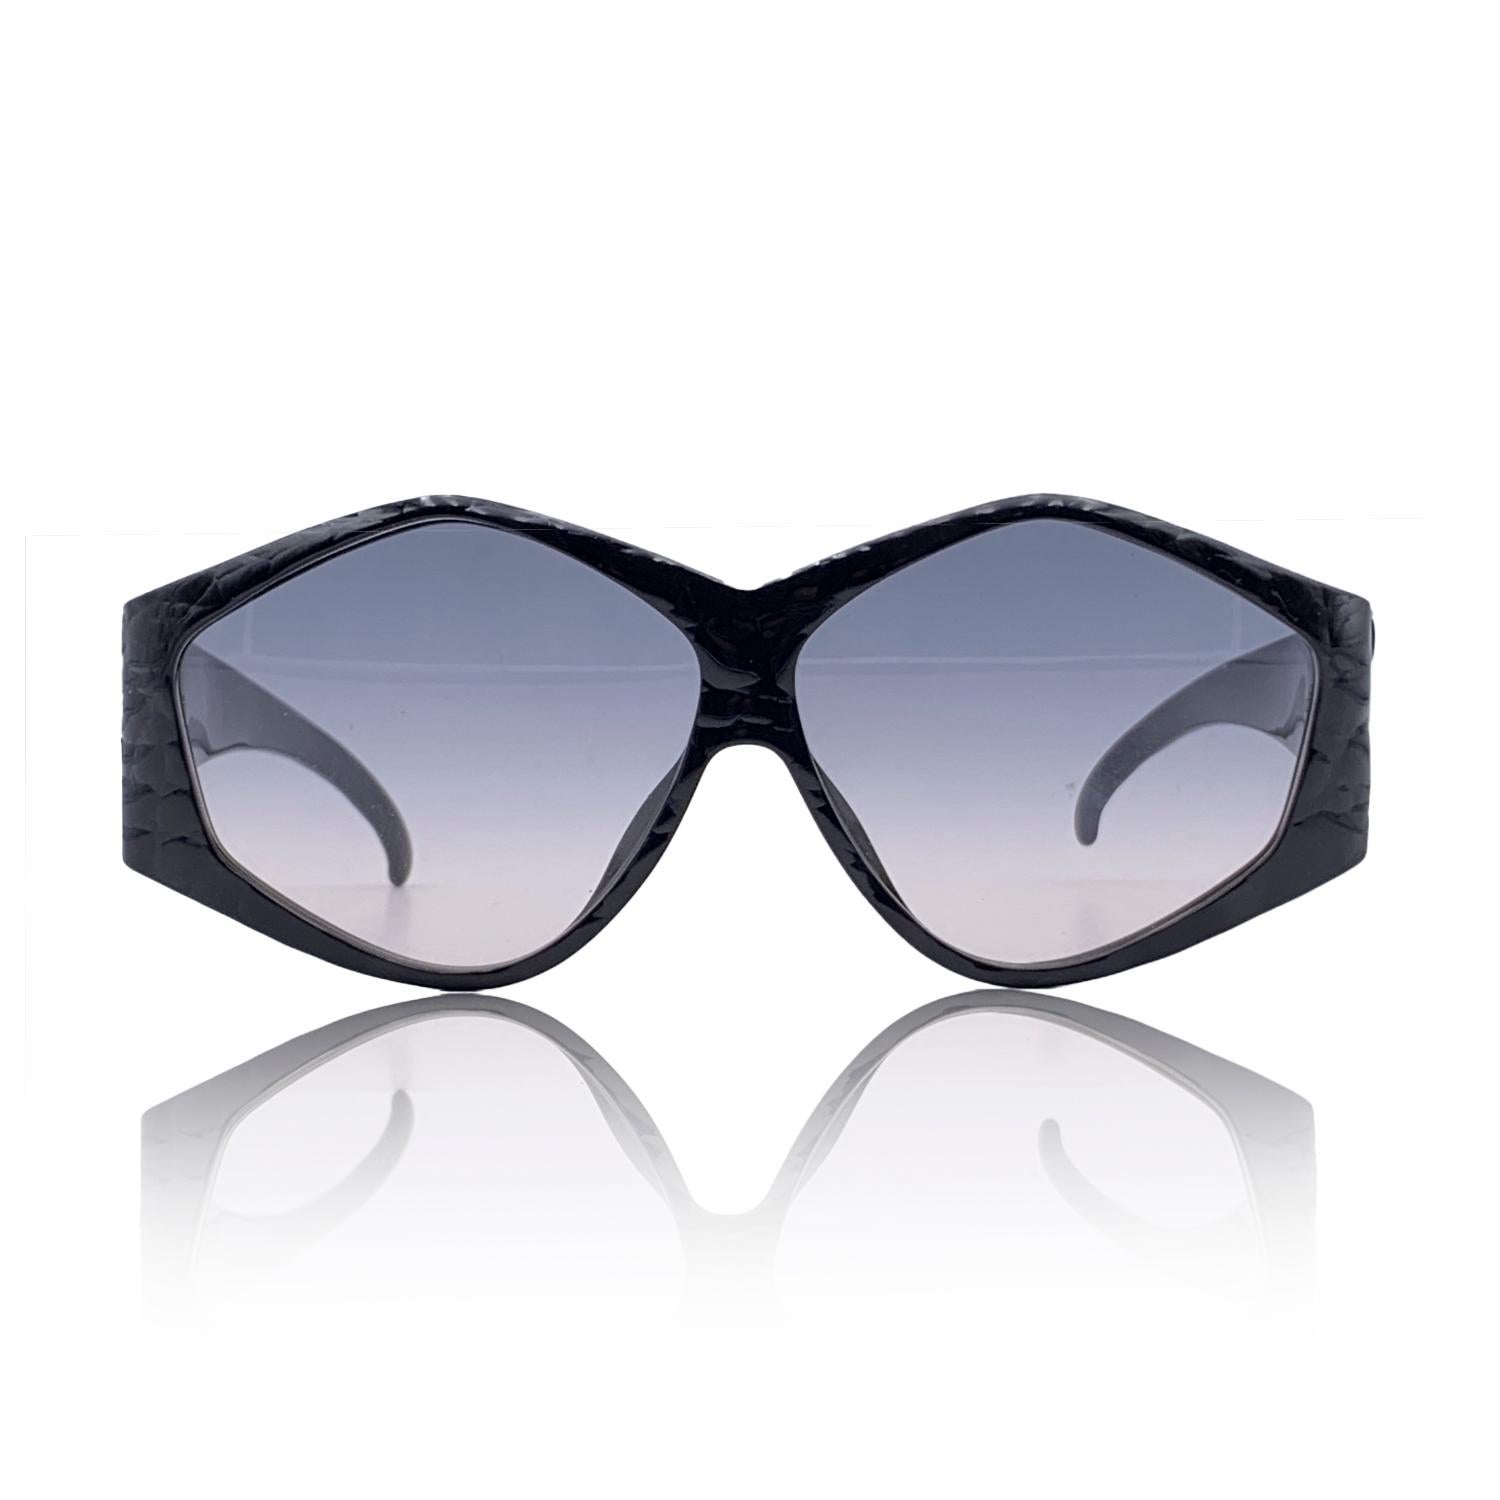 Christian Dior Vintage Sunglasses 2230 90 Black Optyl 64-10 130 mm In Excellent Condition For Sale In Rome, Rome